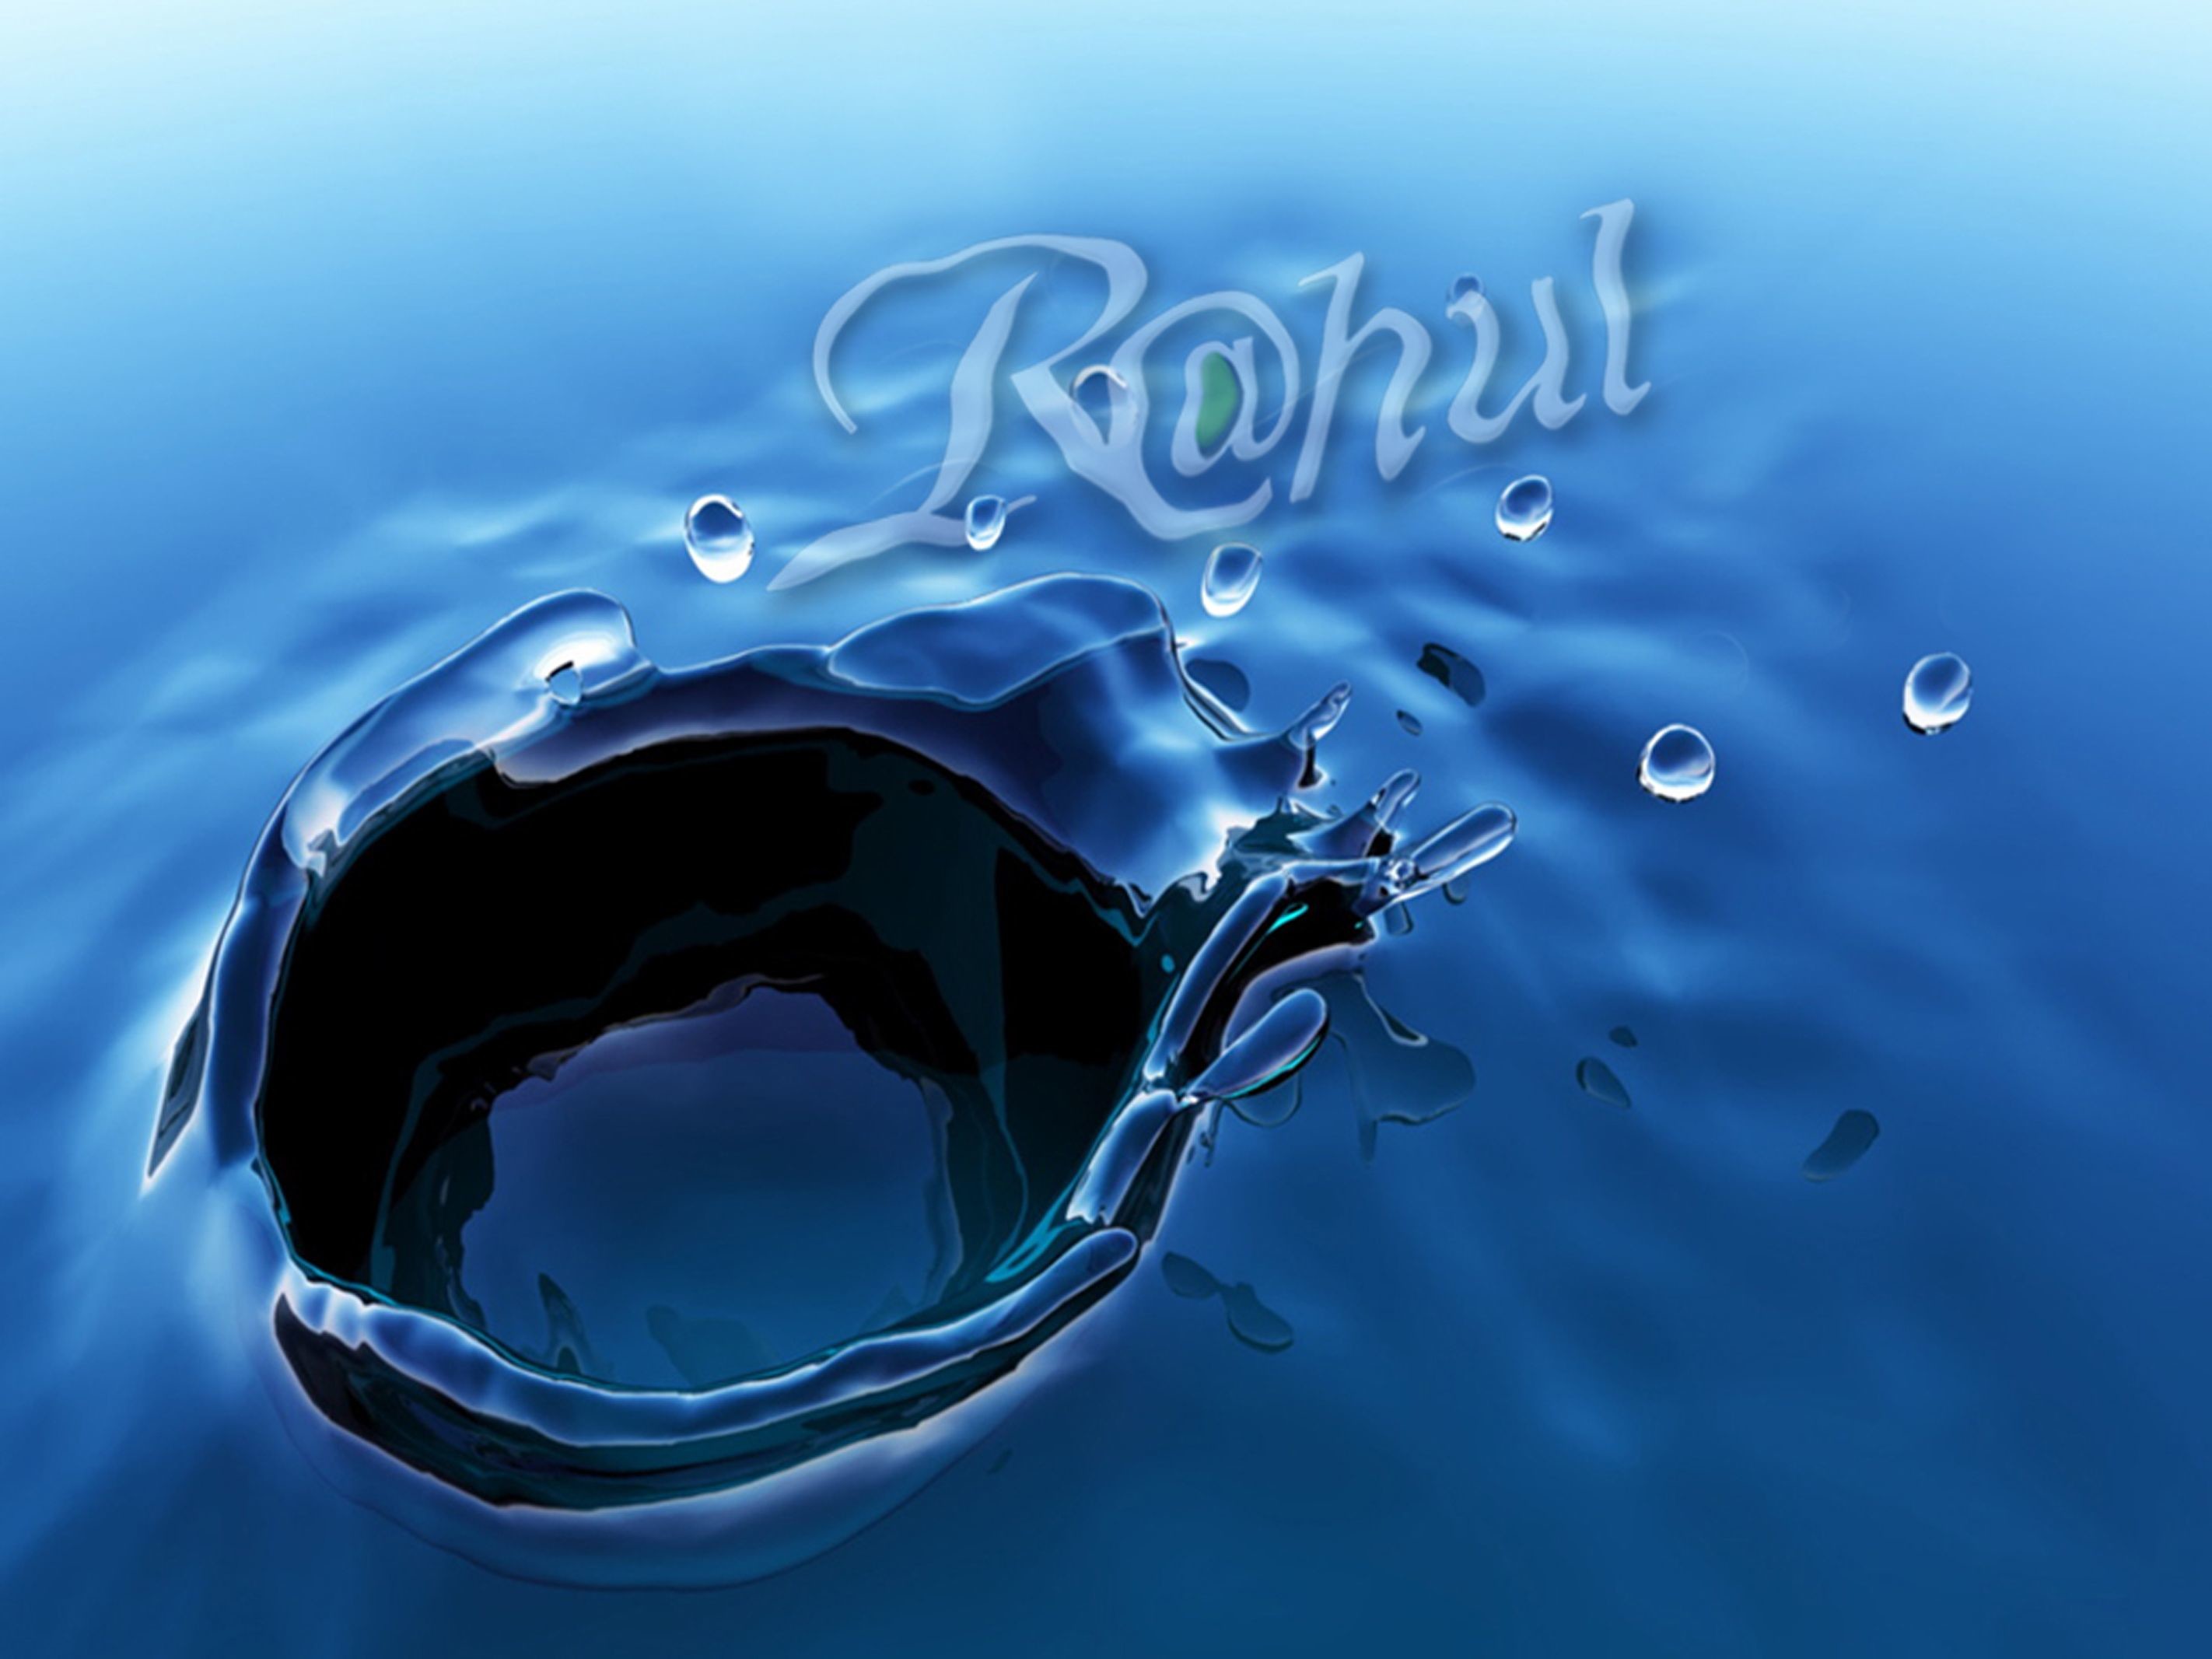 2844x2133 Floating Name 'Rahul' Cool Wallpapers New, Desktop Wallpapers, 3d Wallpaper,  Wallpaper